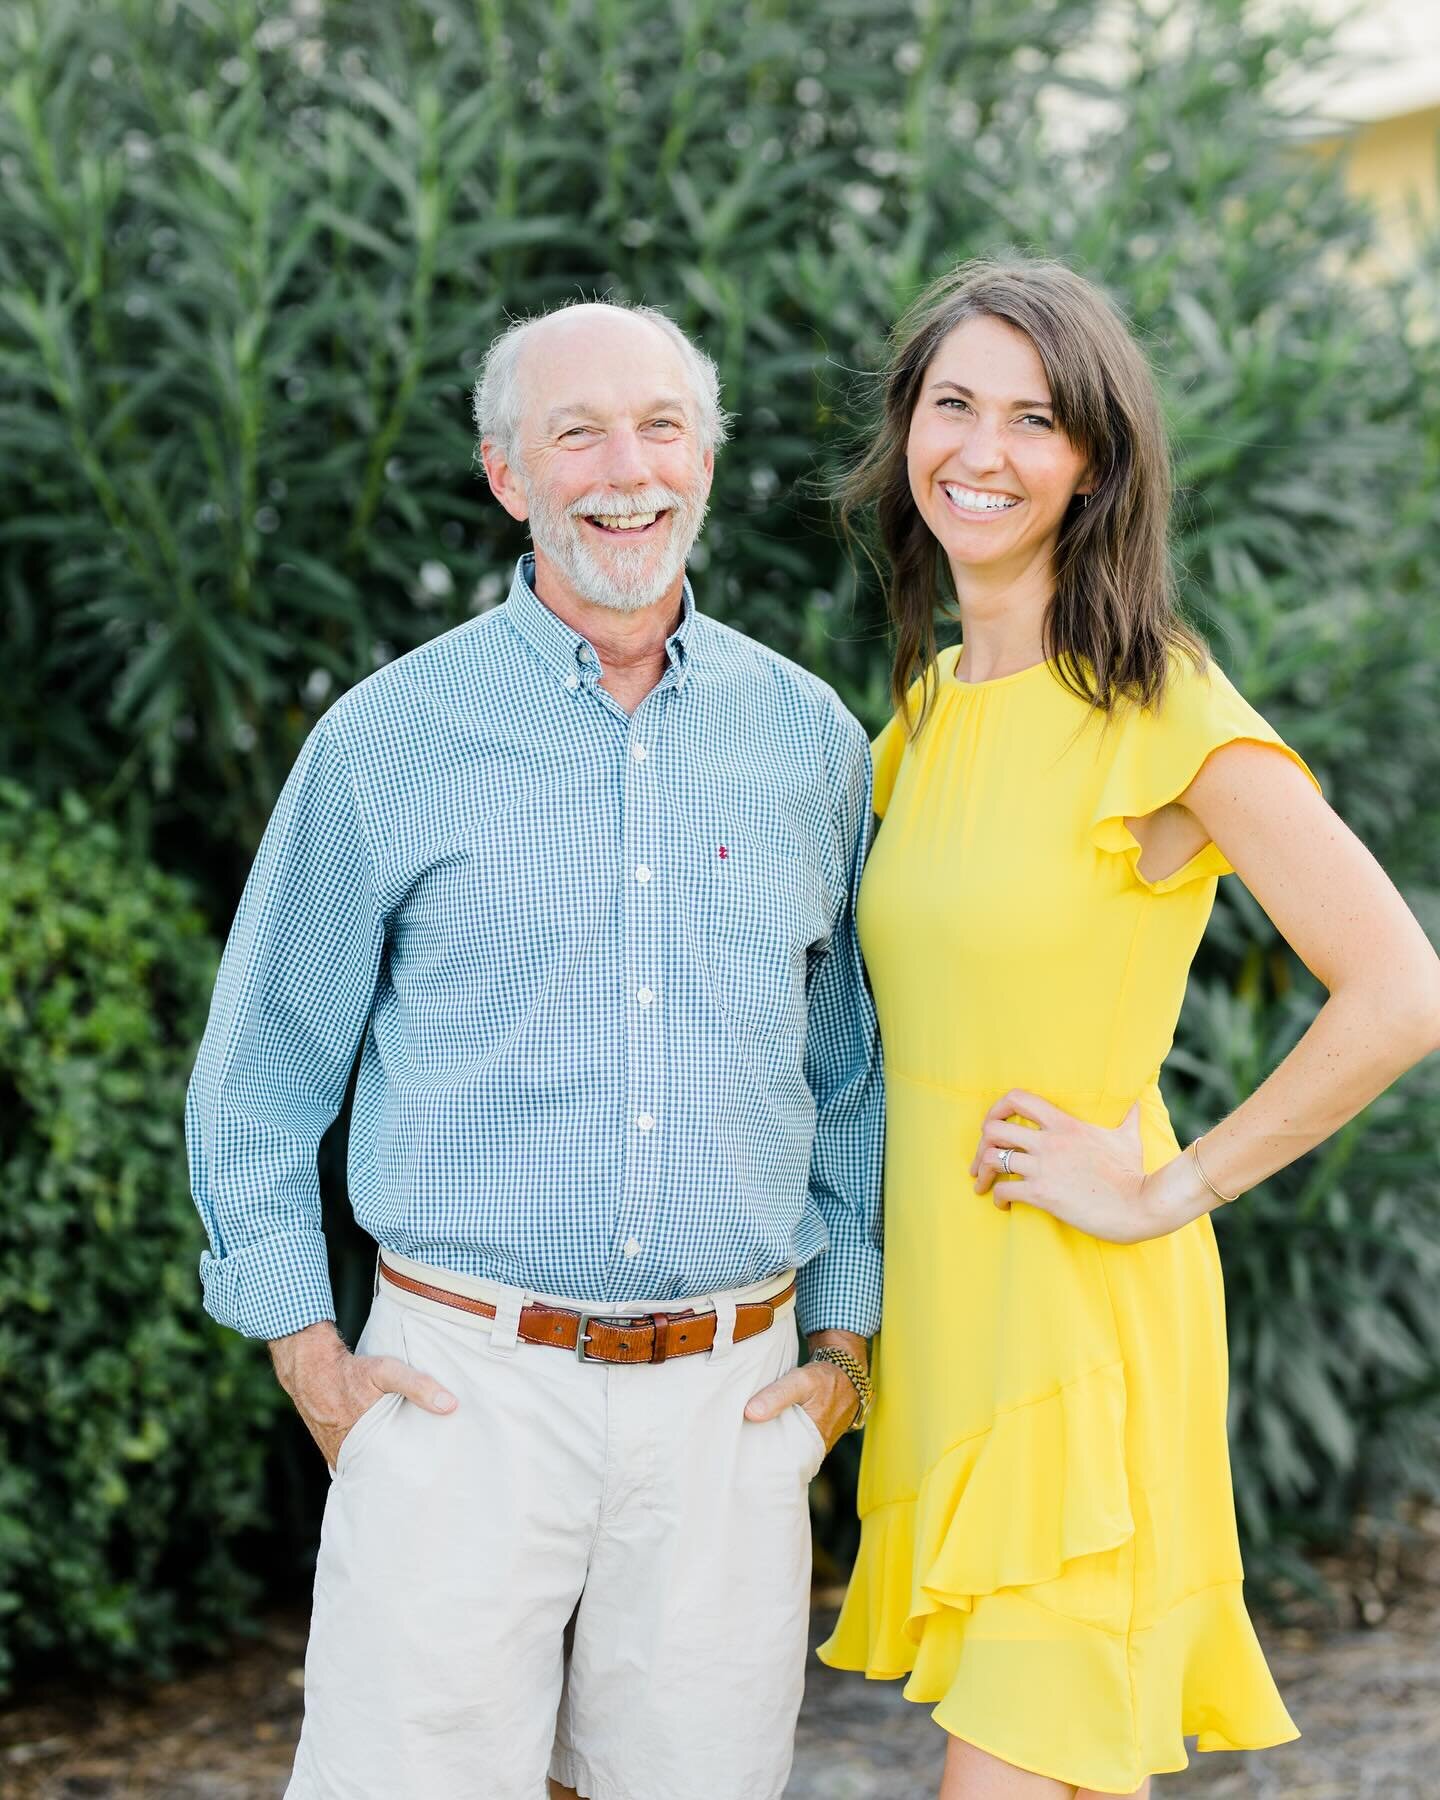 It&rsquo;s #smallbusinesssaturday and this father and daughter team want to say thanks! For 35+ years, Cape Fear Psychological Services has served our community. We are grateful for the opportunity to continue to grow our small business and give back